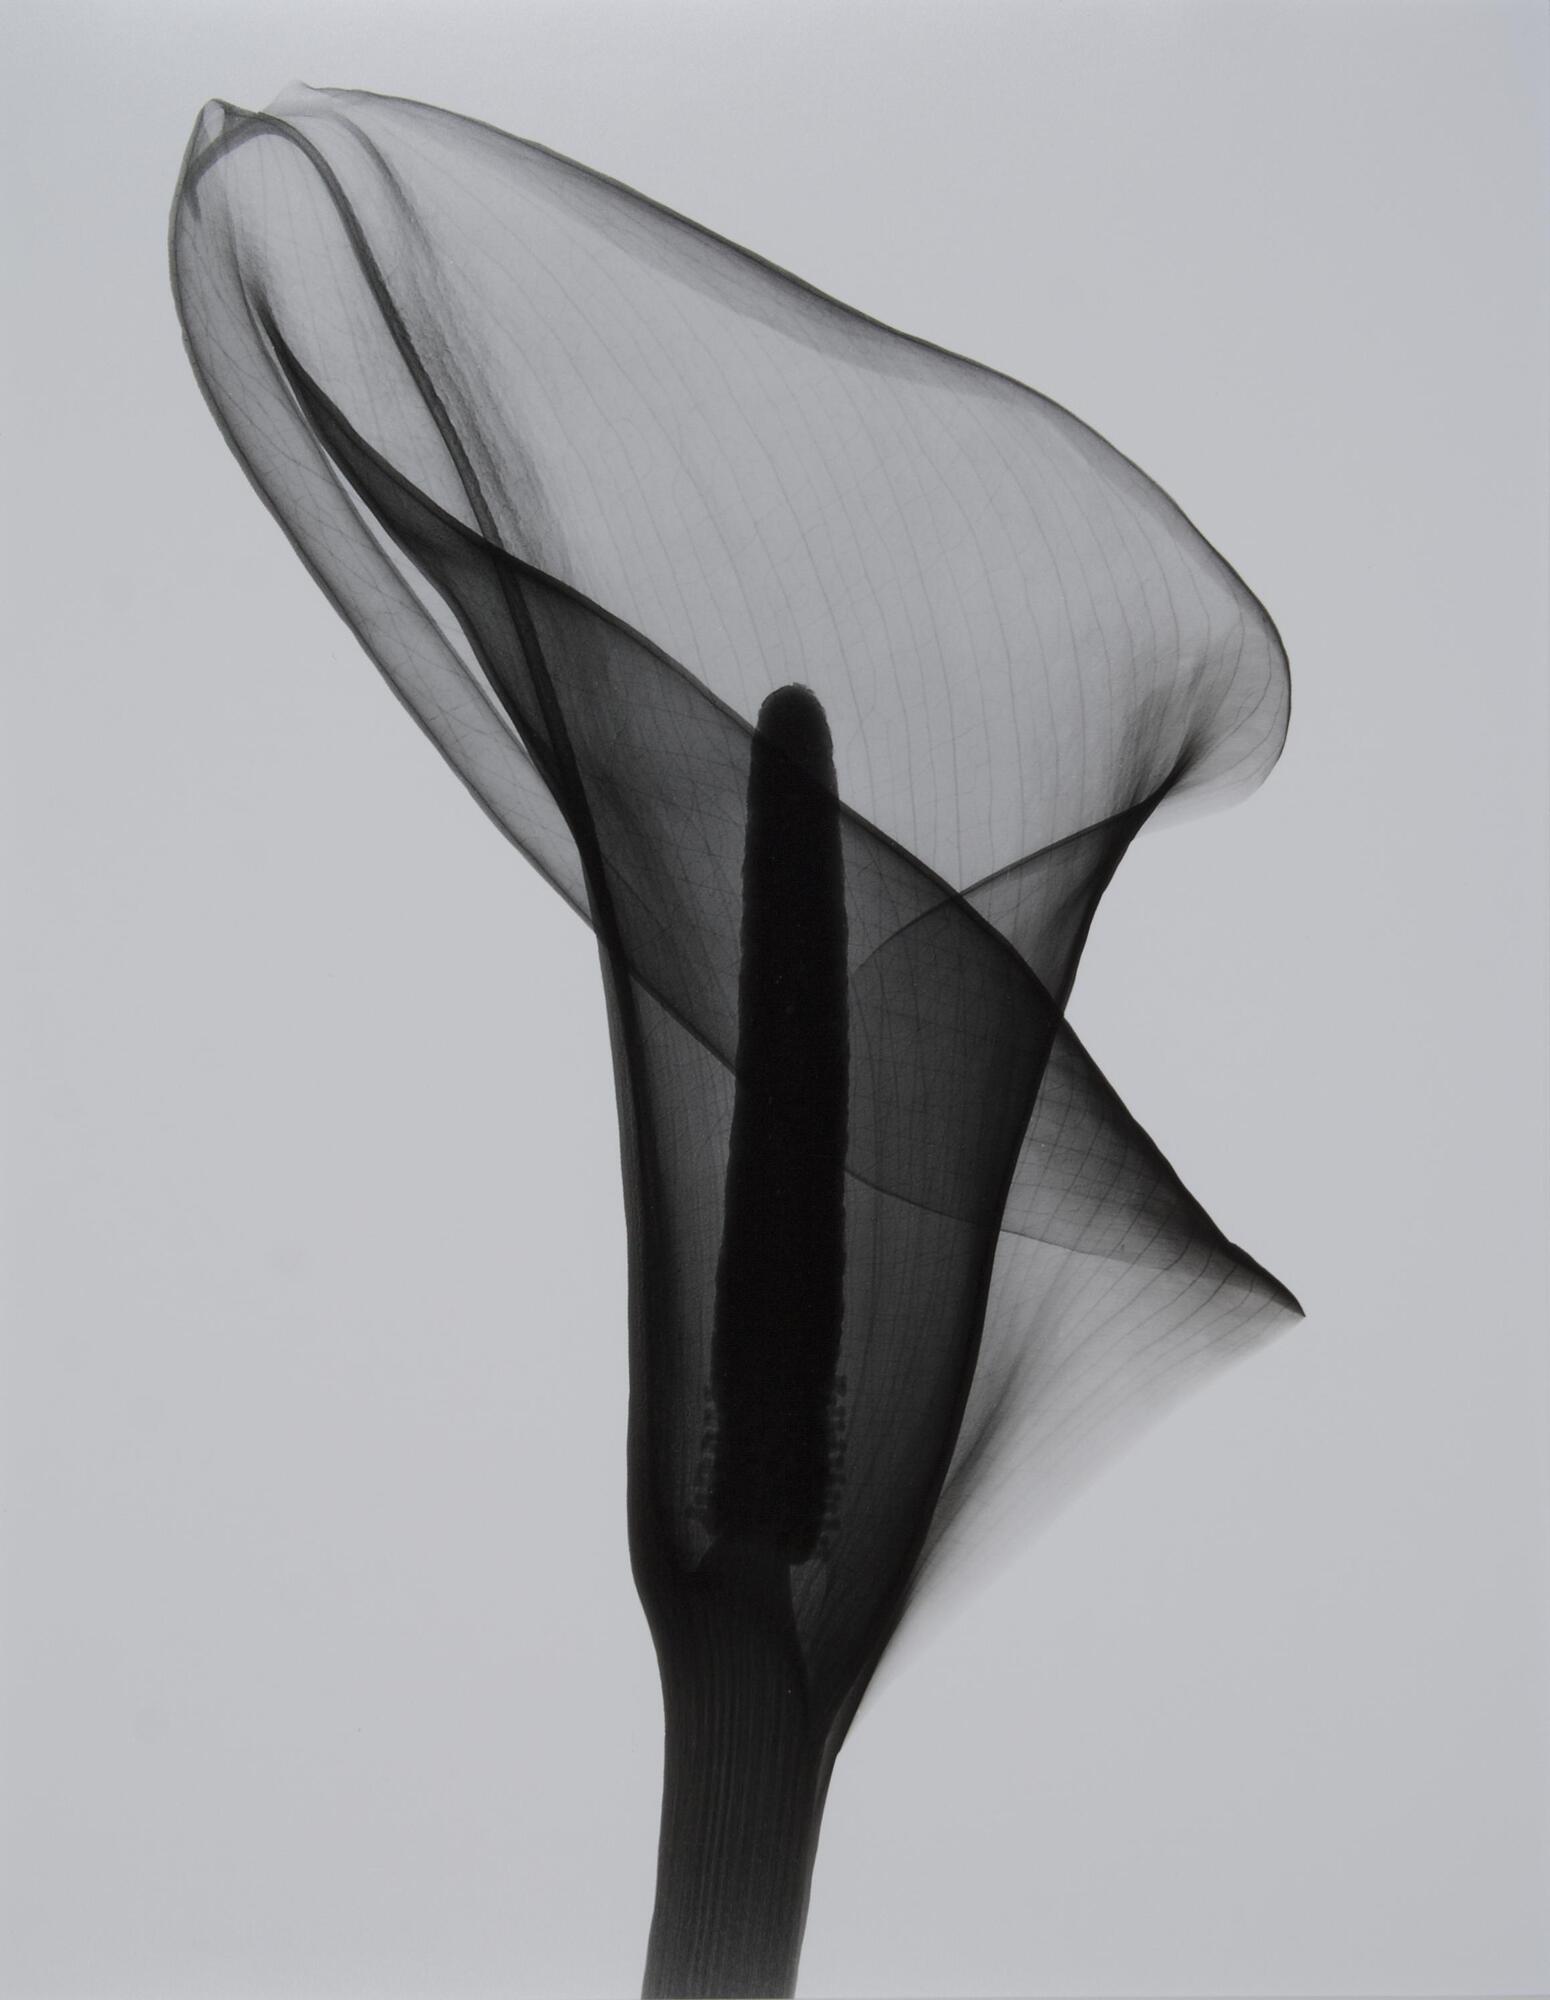 A single calla lilly and partial stem, black with light grey background.